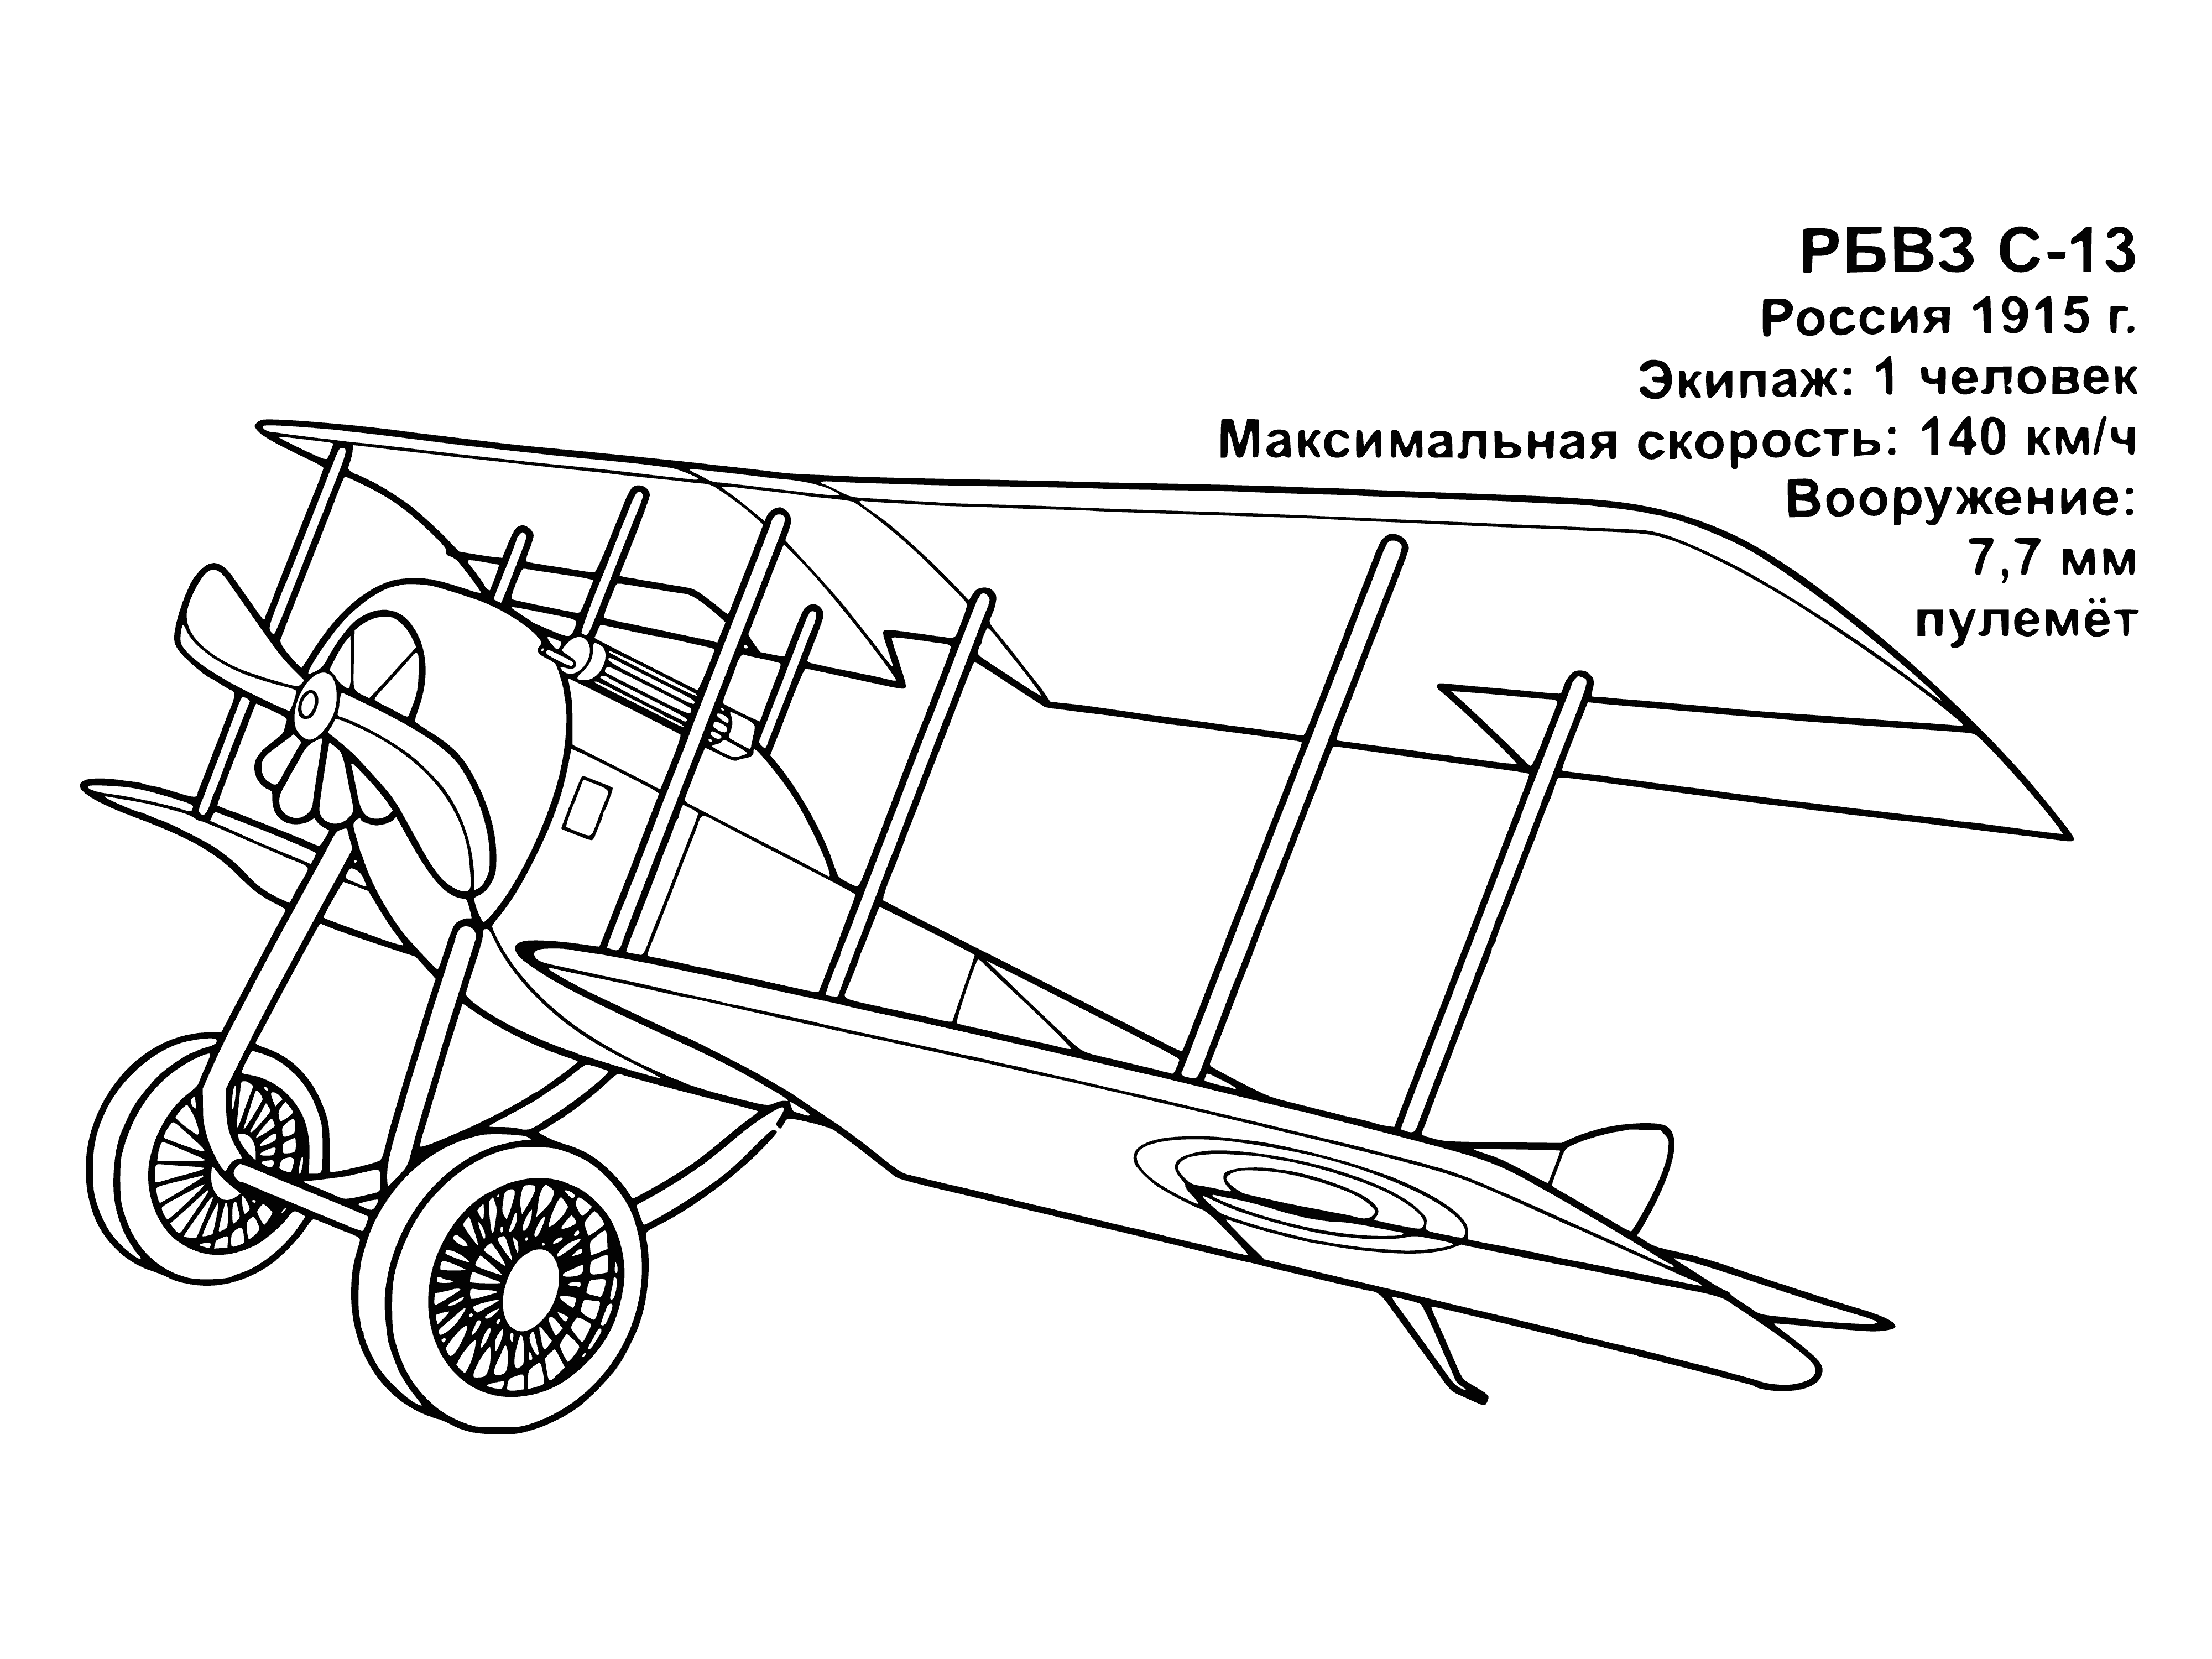 coloring page: Circular-bodied plane w/ long thin nose; 2 sets of wings (upper smaller); long, thin tail w/ small horizontal wing at end; propeller in front, wheels under wings.